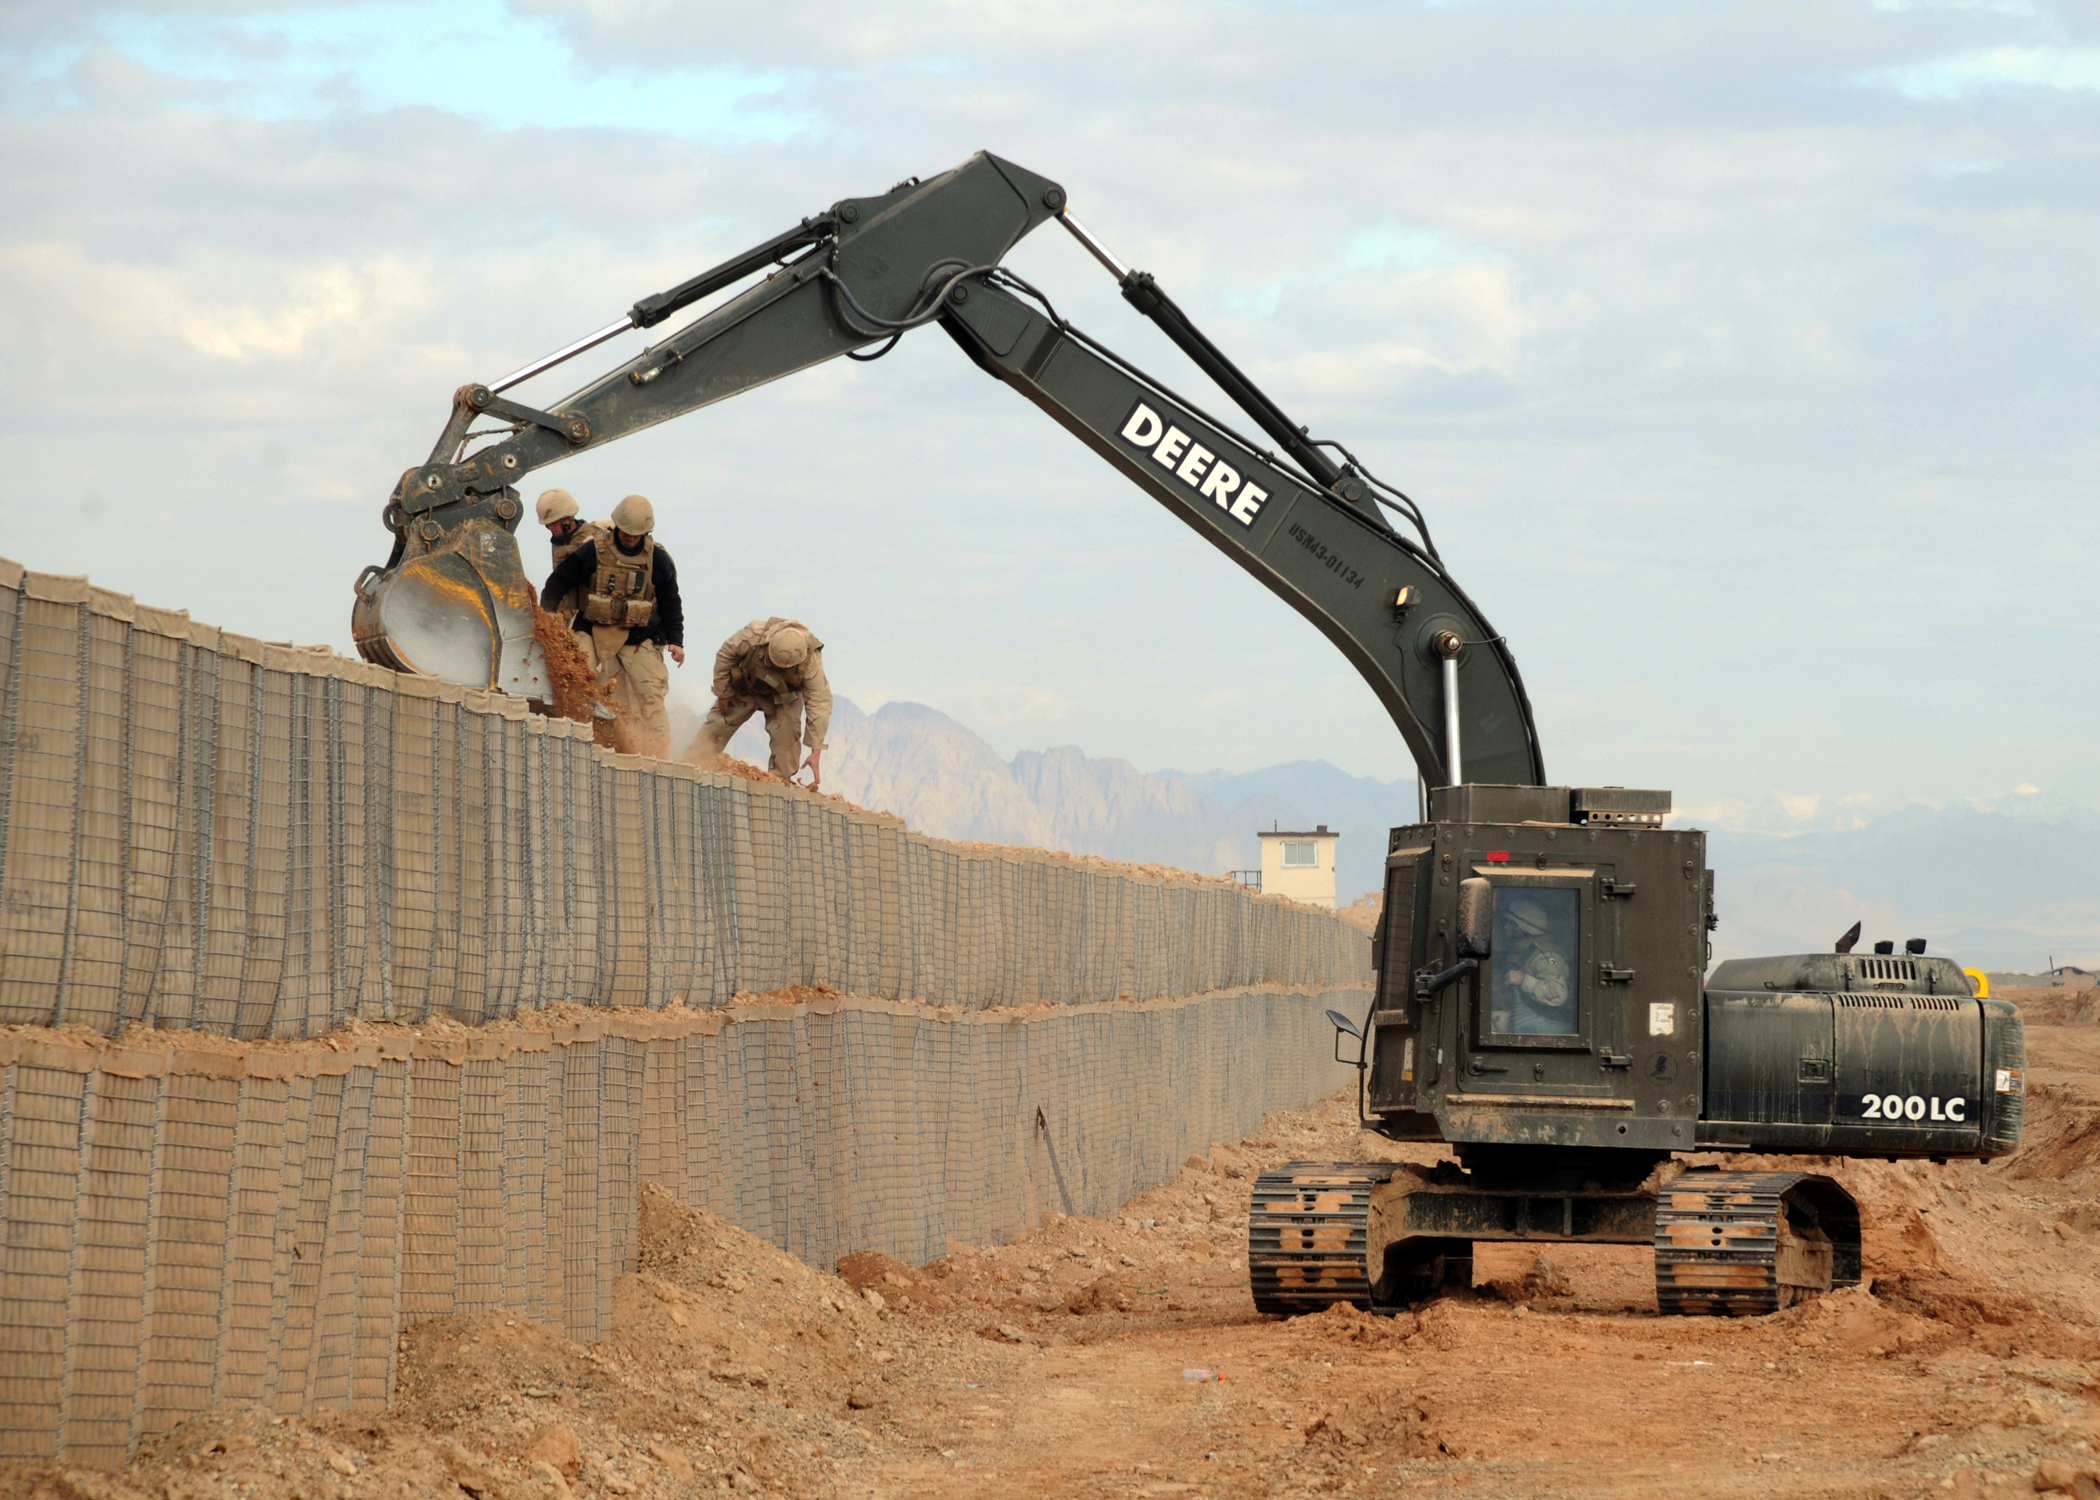 Up-armored excavator in Afghanistan